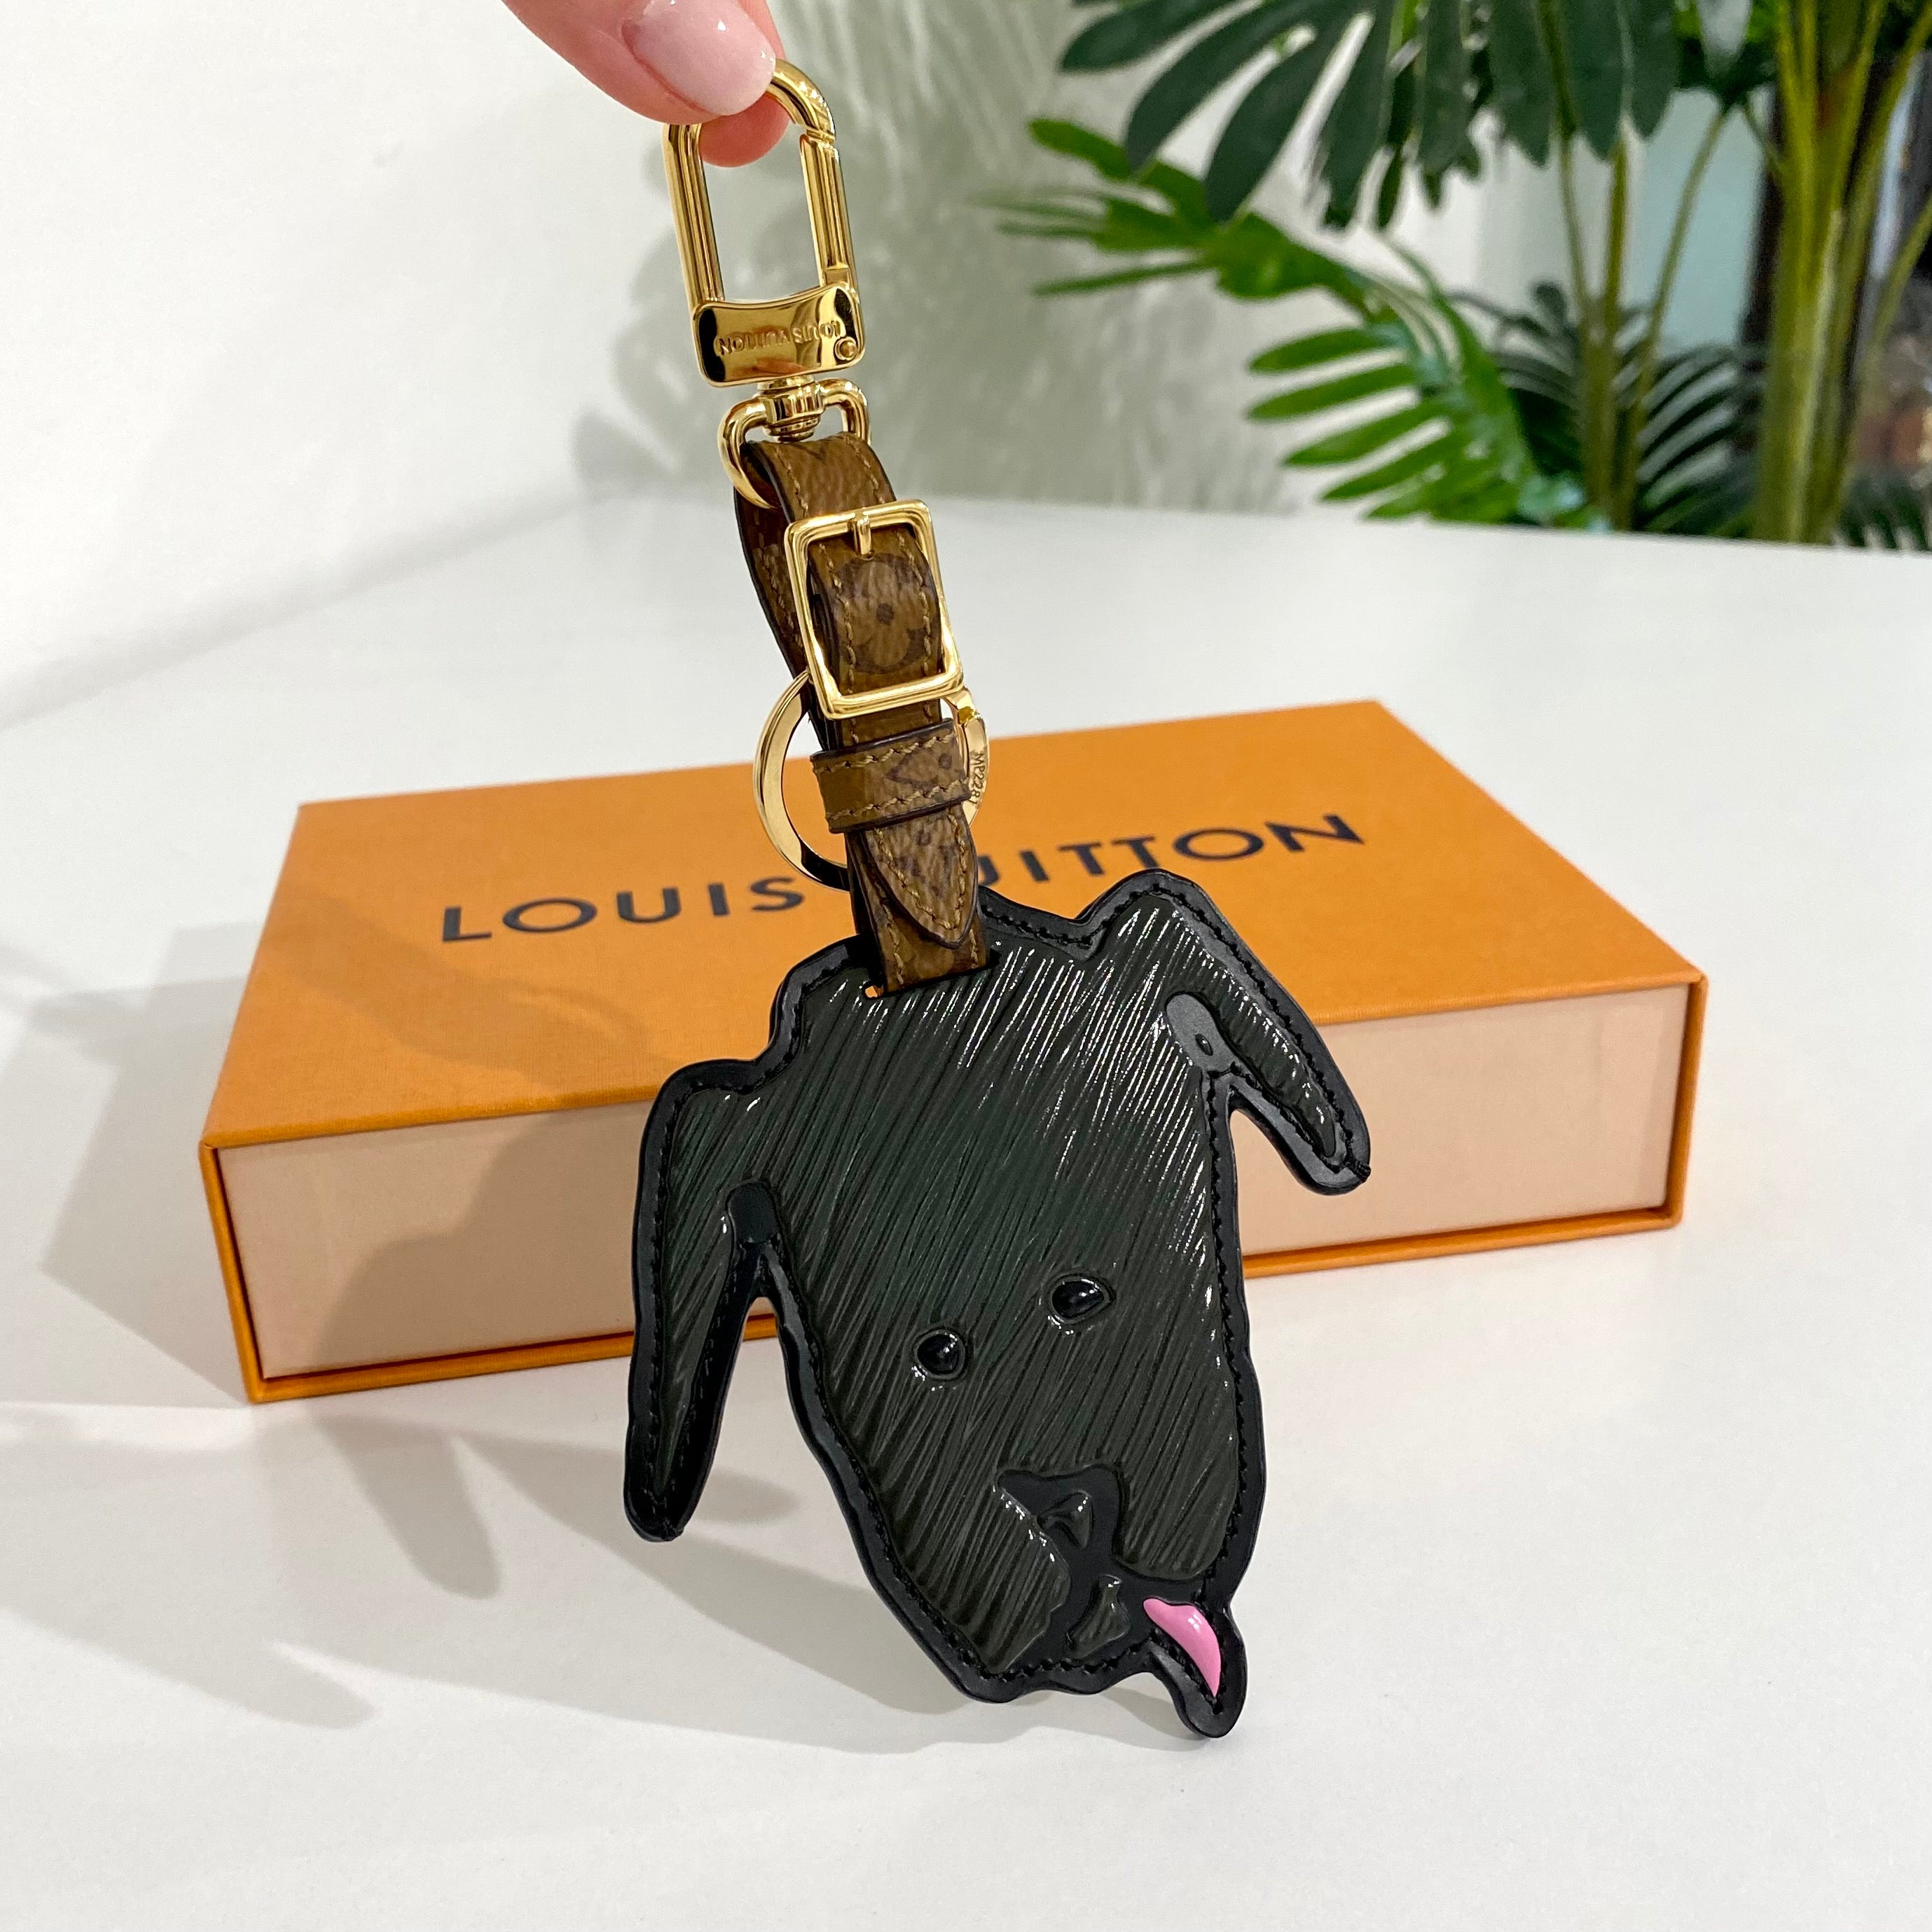 Louis Vuitton Dog Bag Charm – Dina C's Fab and Funky Consignment Boutique